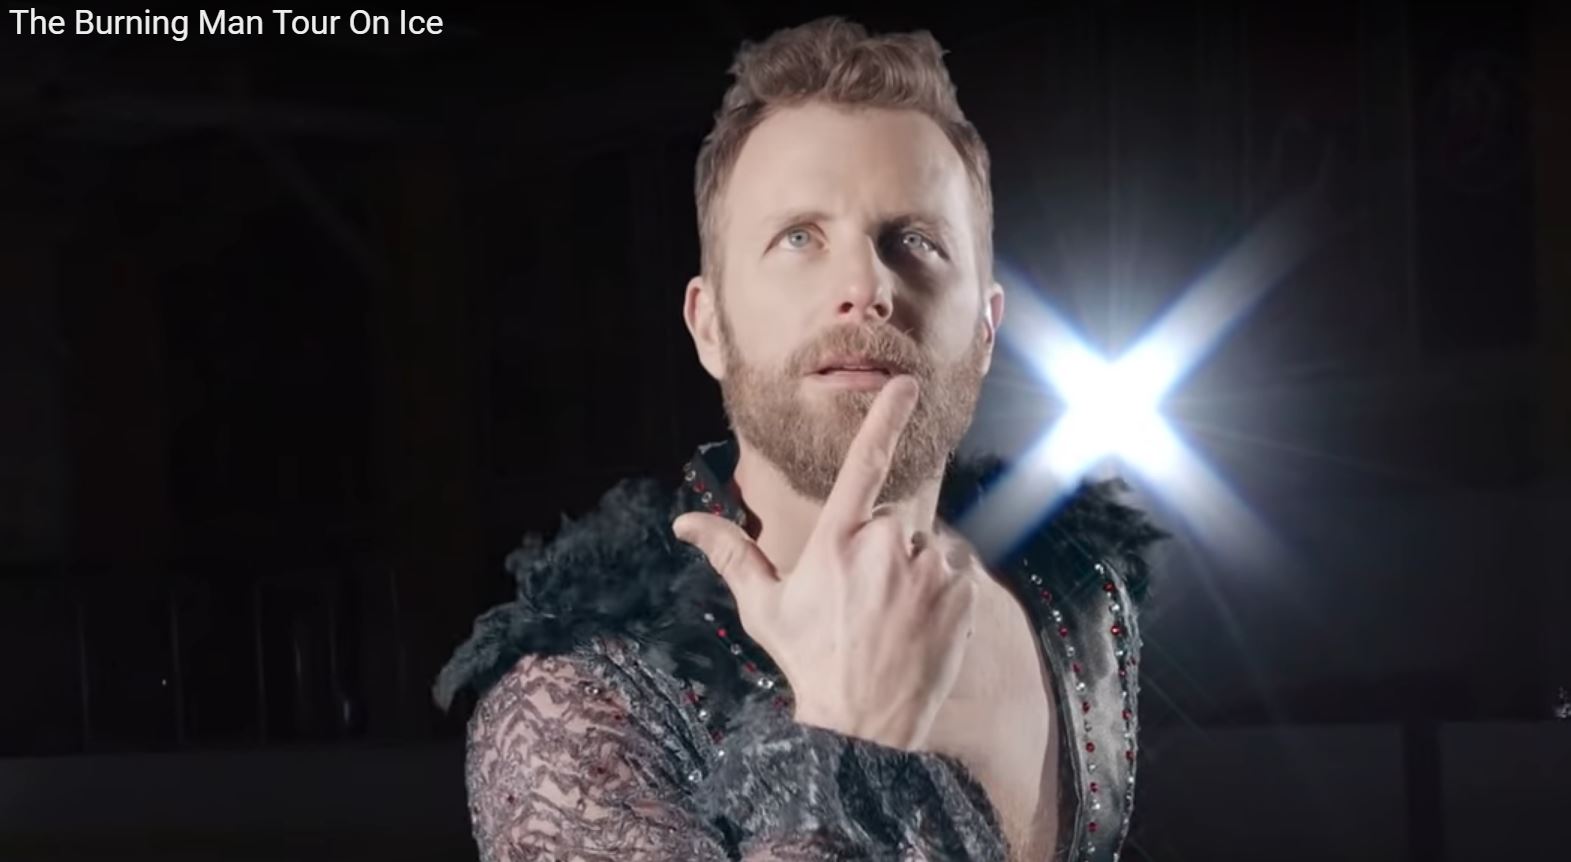 Dierks Bentley- The Burning Man Tour On Ice [VIDEO] (if you can take it)